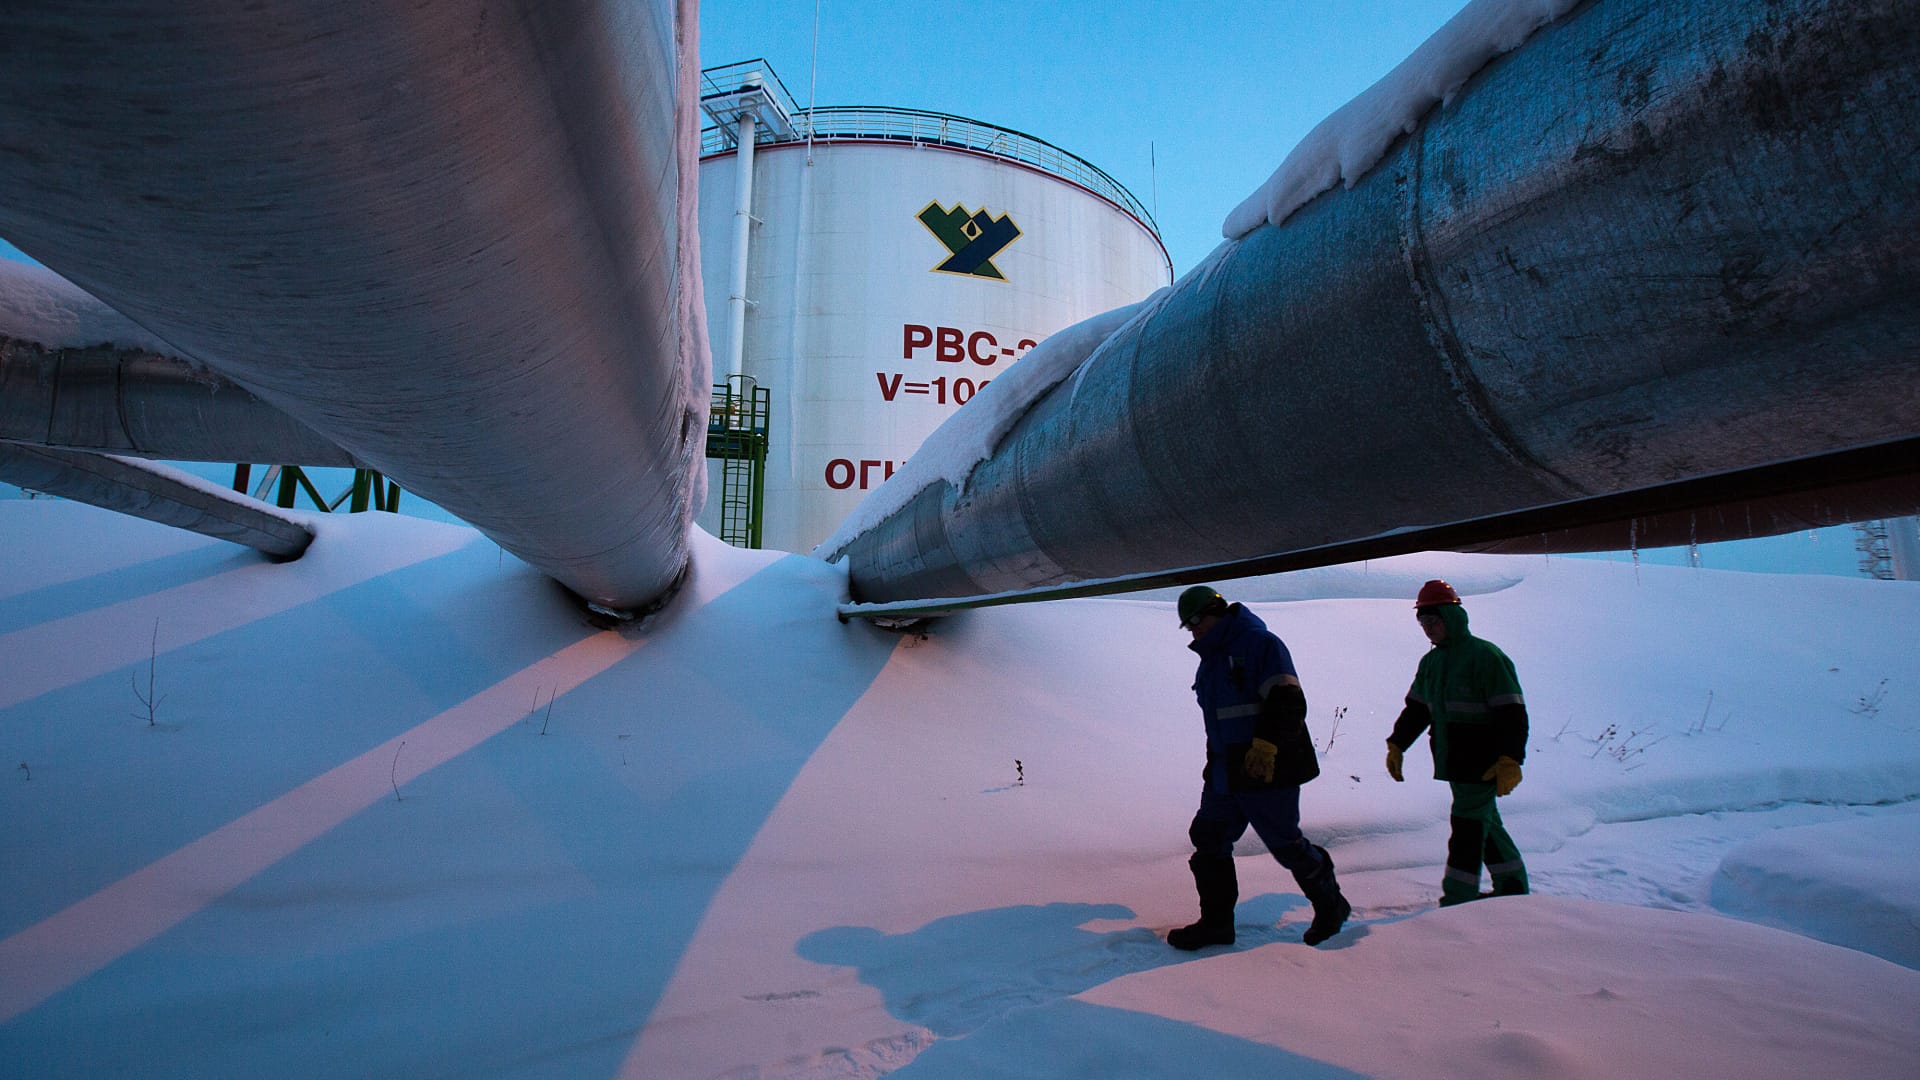 Putin is squeezing gas supplies. And Europe is getting seriously worried about a total shutdown